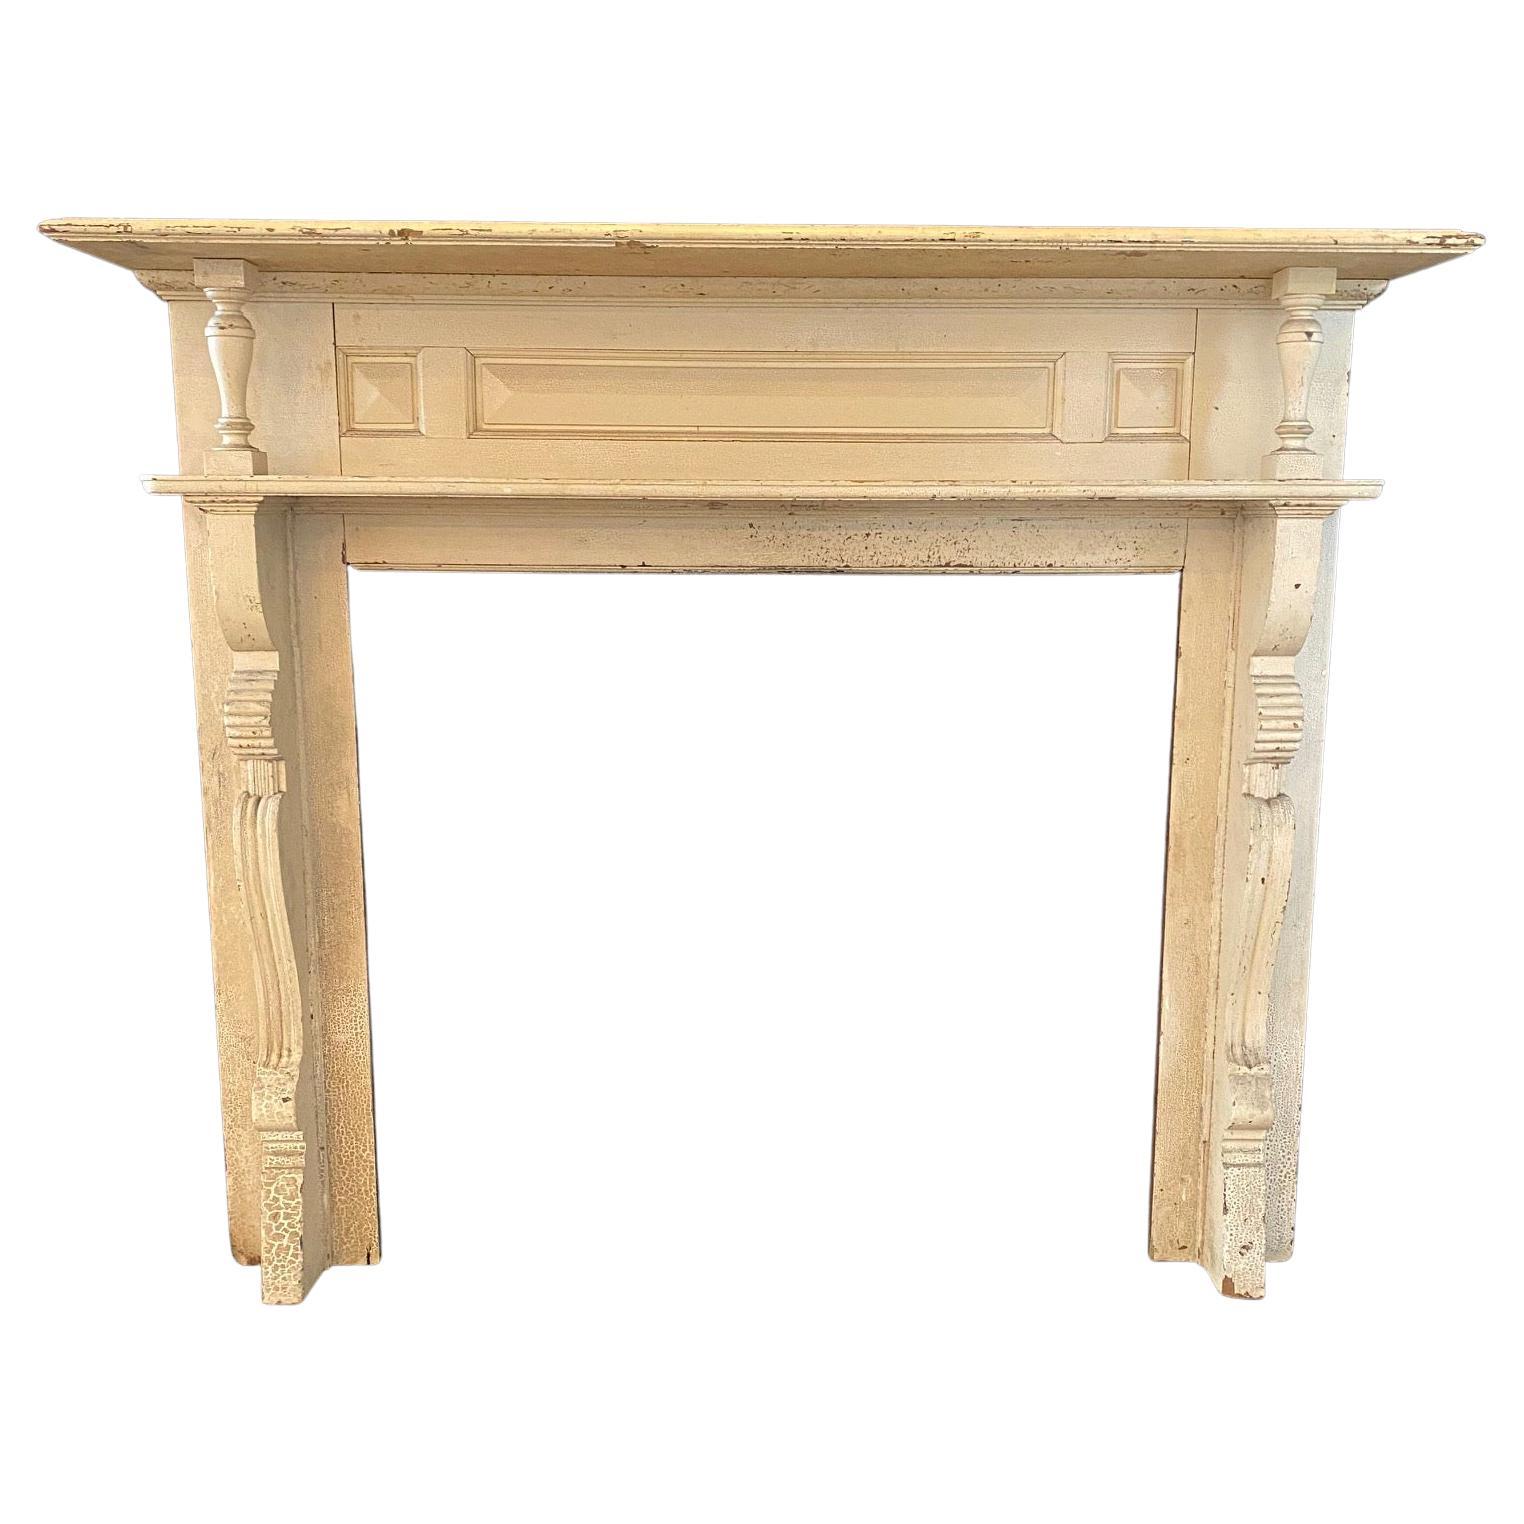 Early 19th Century Federal Fireplace Mantel Found in Maine